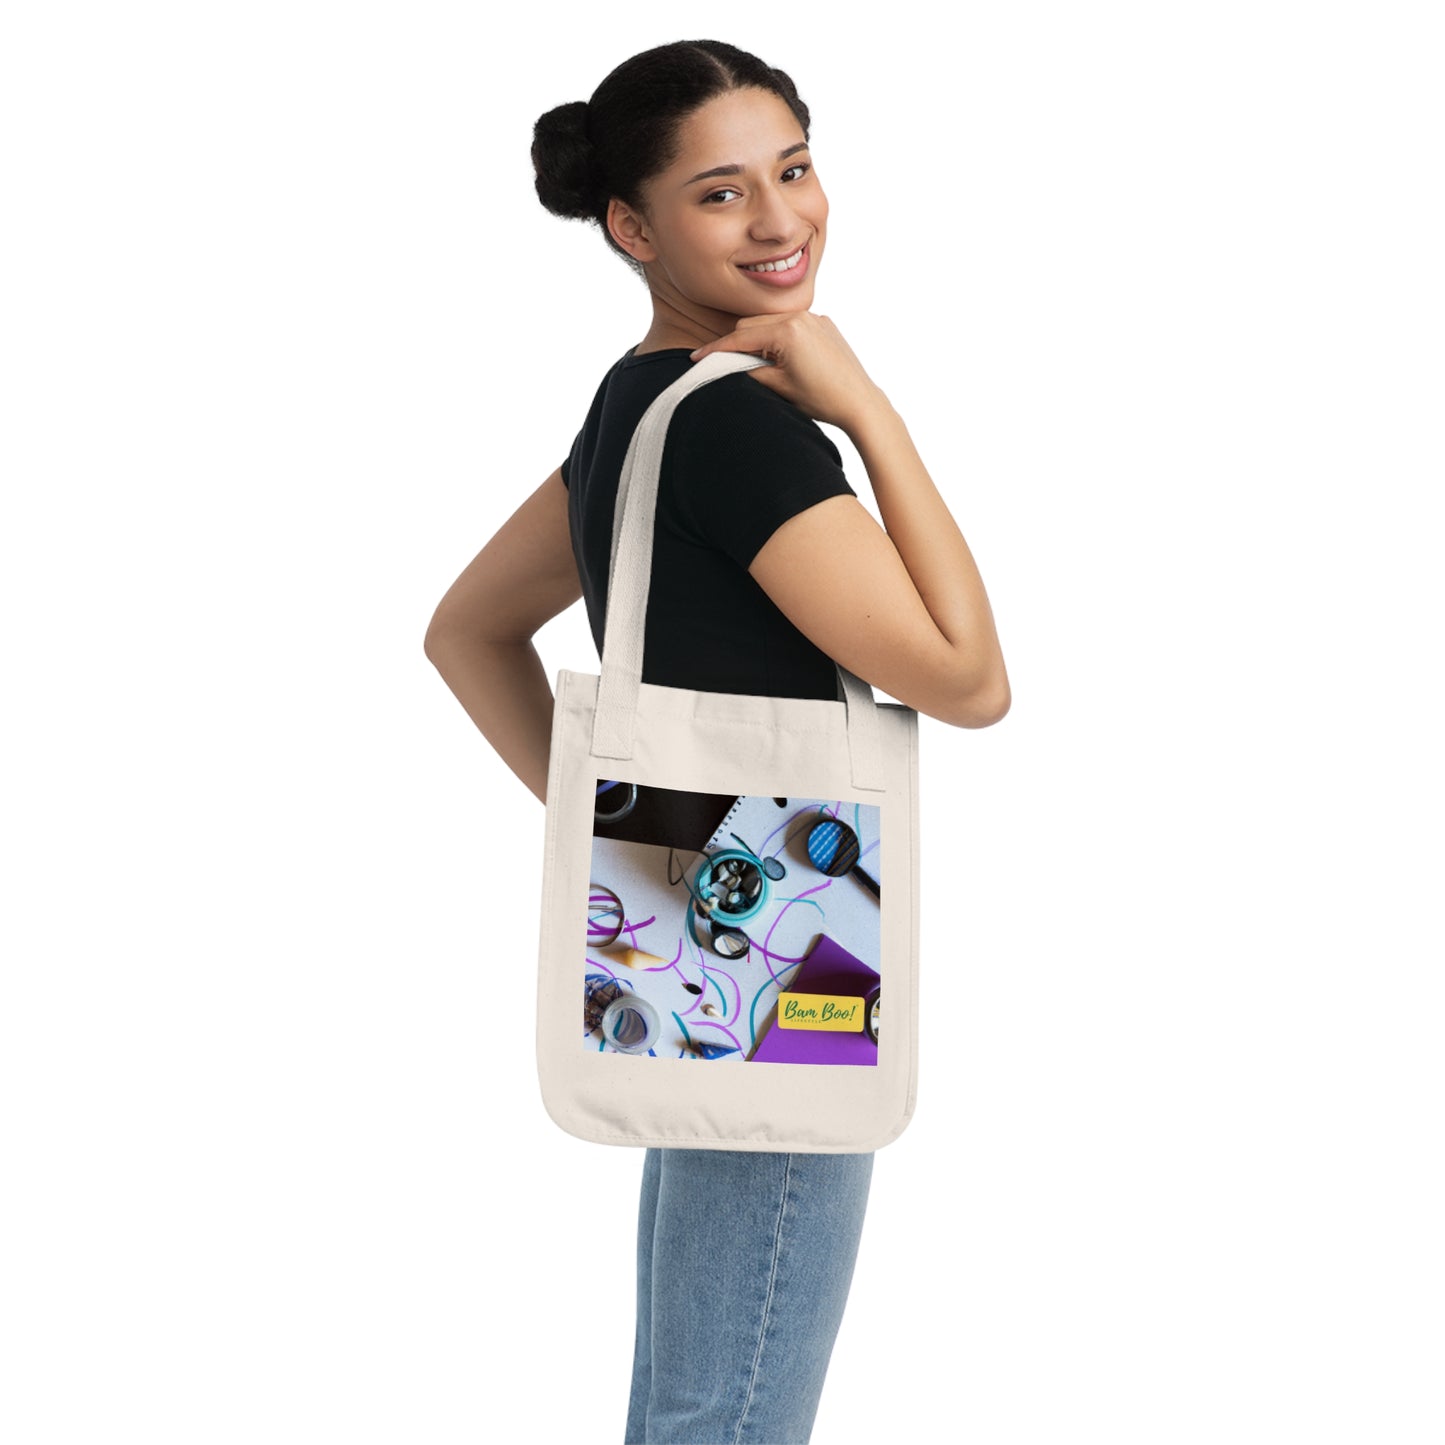 "Dynamic Expressions: Shaping Creative Movement" - Bam Boo! Lifestyle Eco-friendly Tote Bag